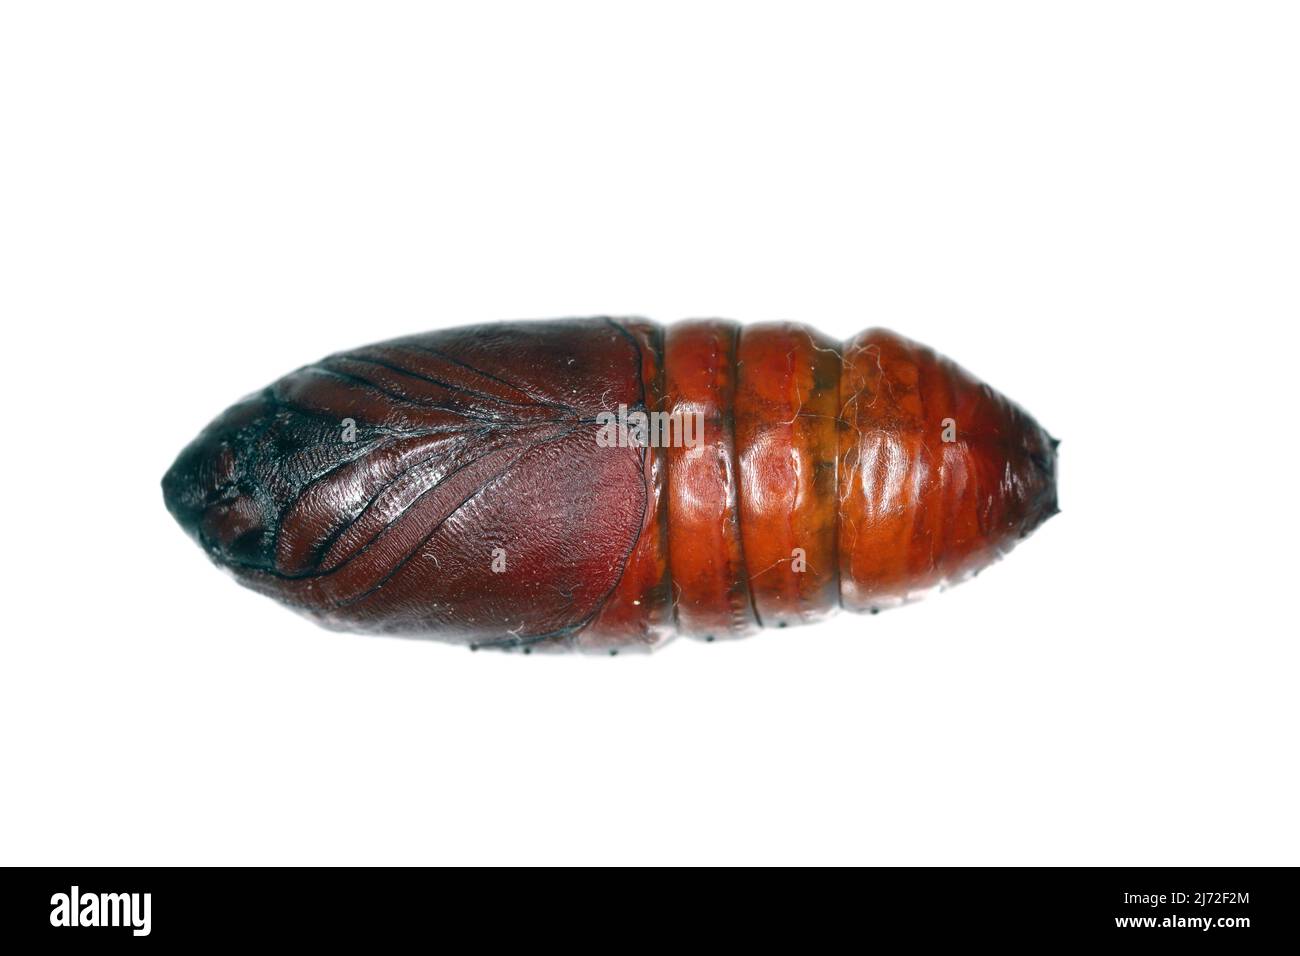 Pupa of pine processionary (Thaumetopoea pityocampa) is a moth of the family Notodontidae, known for the irritating hairs of its caterpillars. Stock Photo